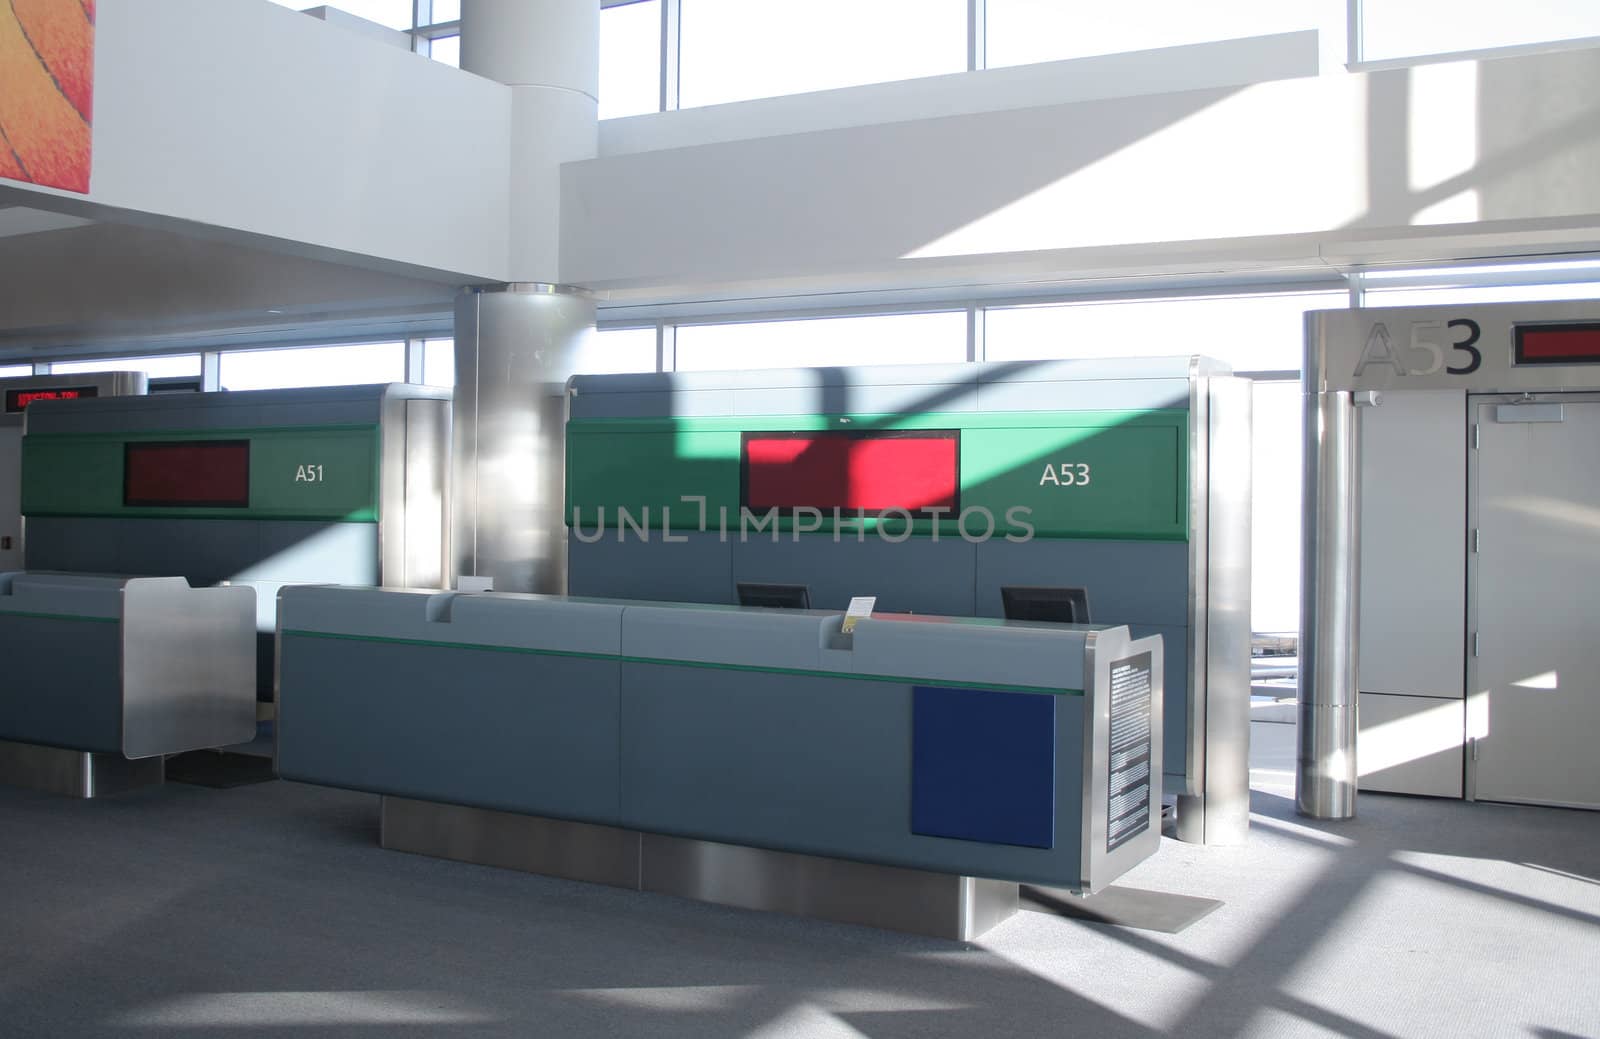 Airline ticketing and check-in counter